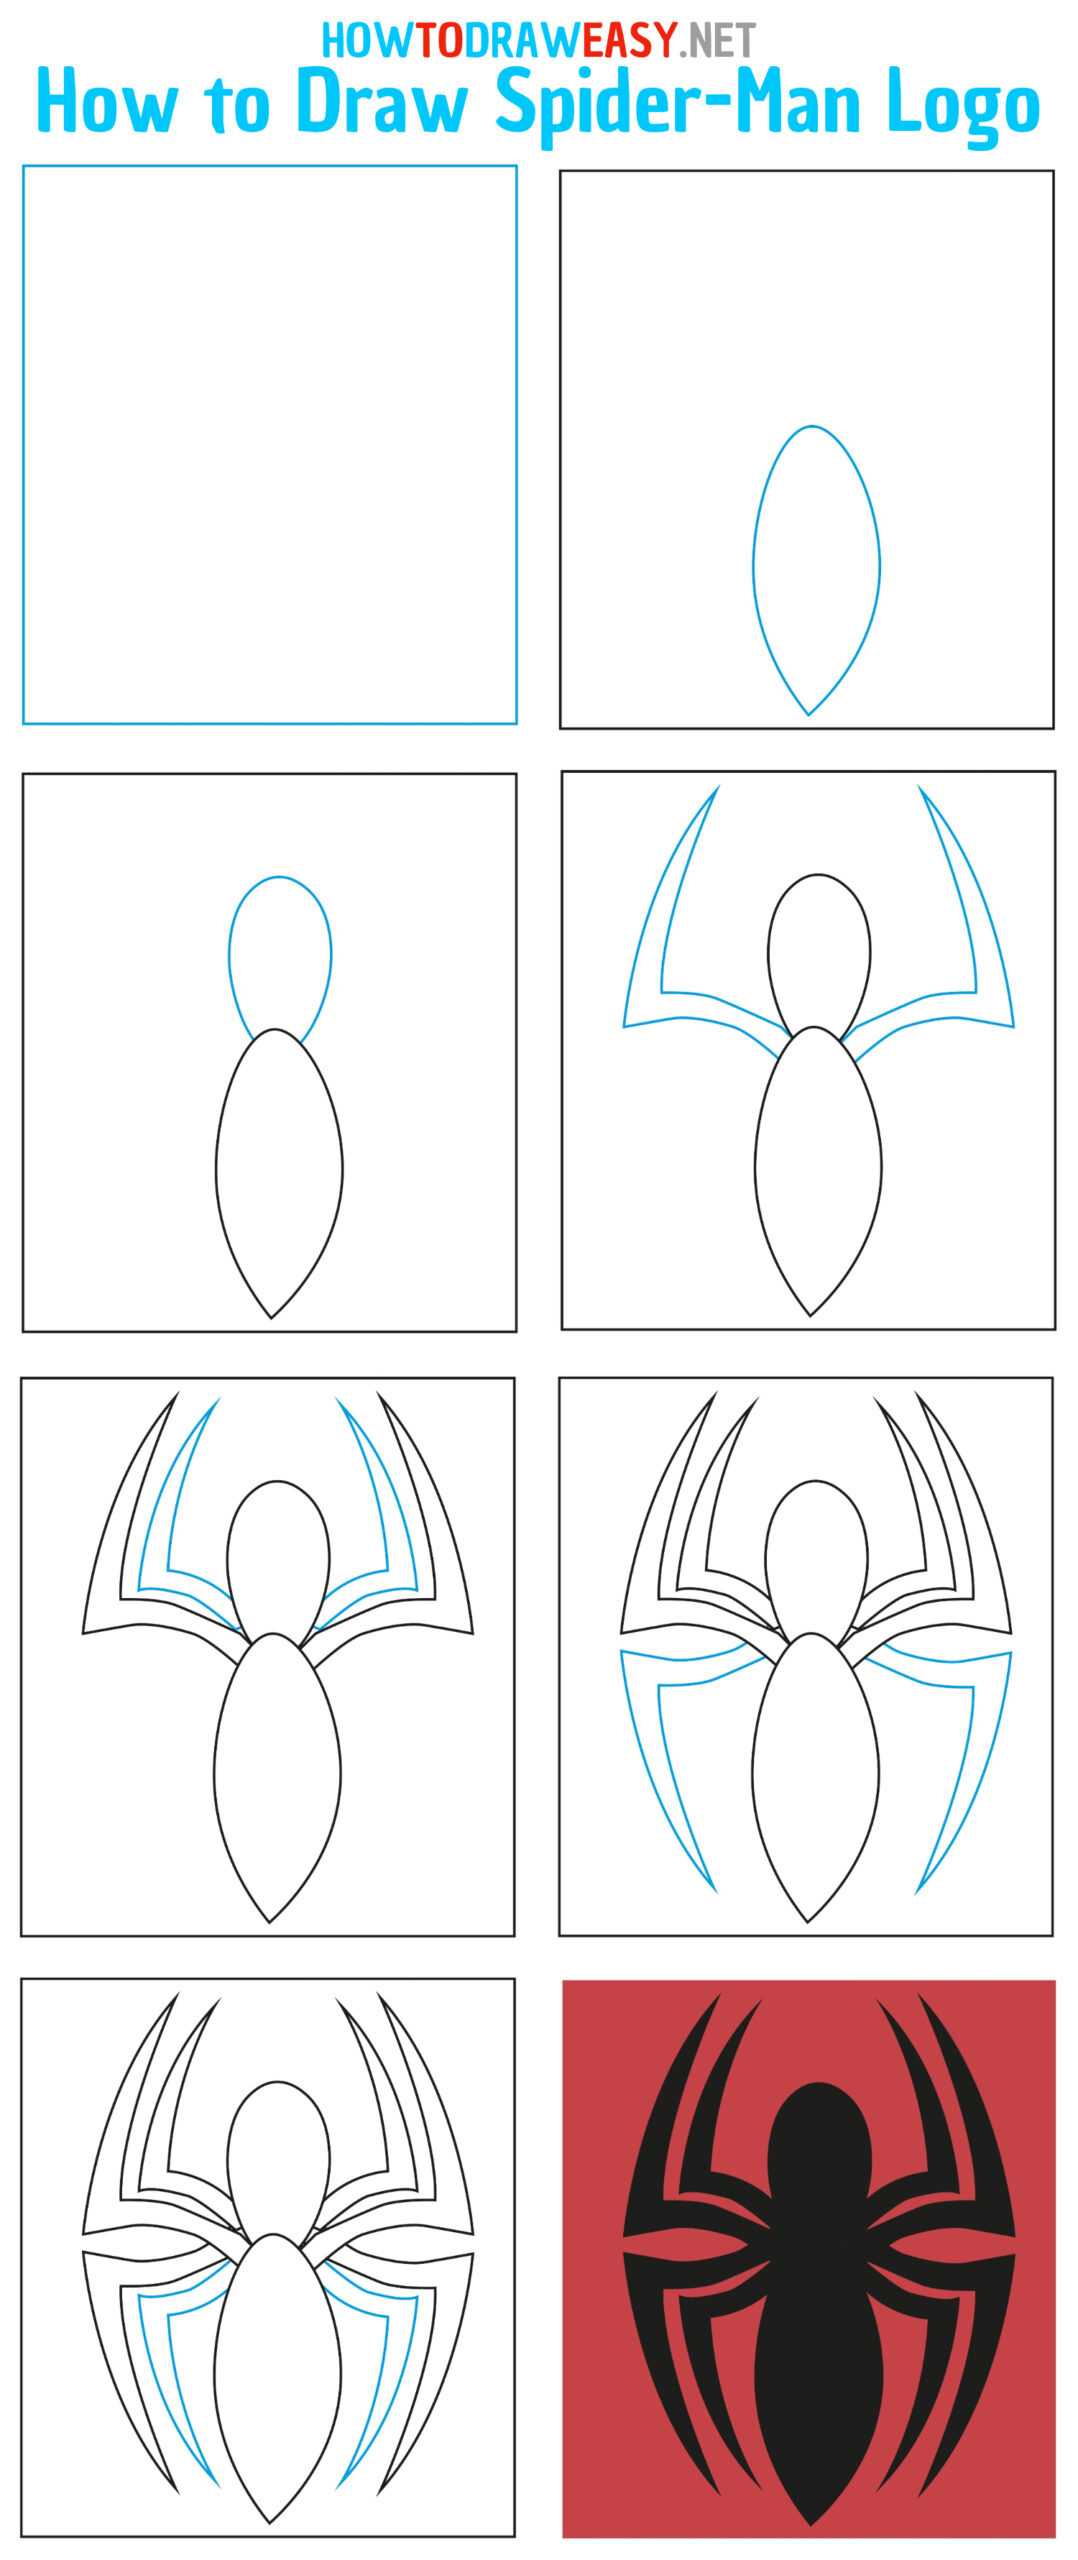 How to Draw Spiderman logo Step by Step